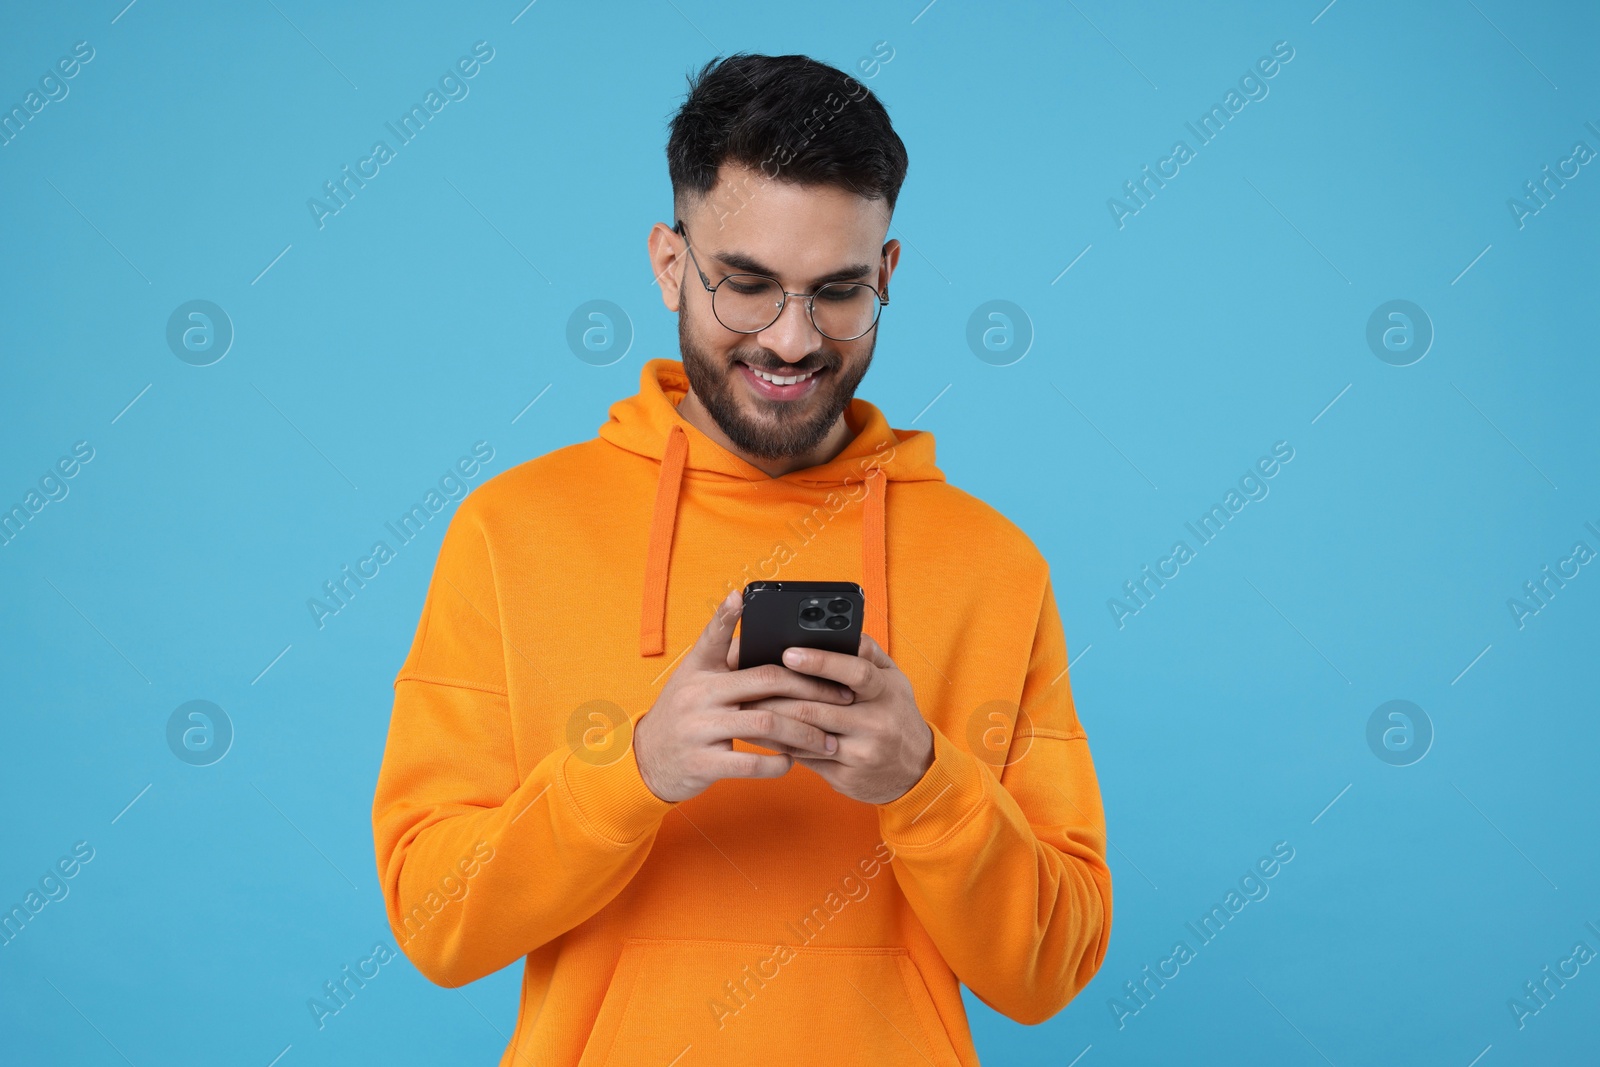 Photo of Happy young man using smartphone on light blue background